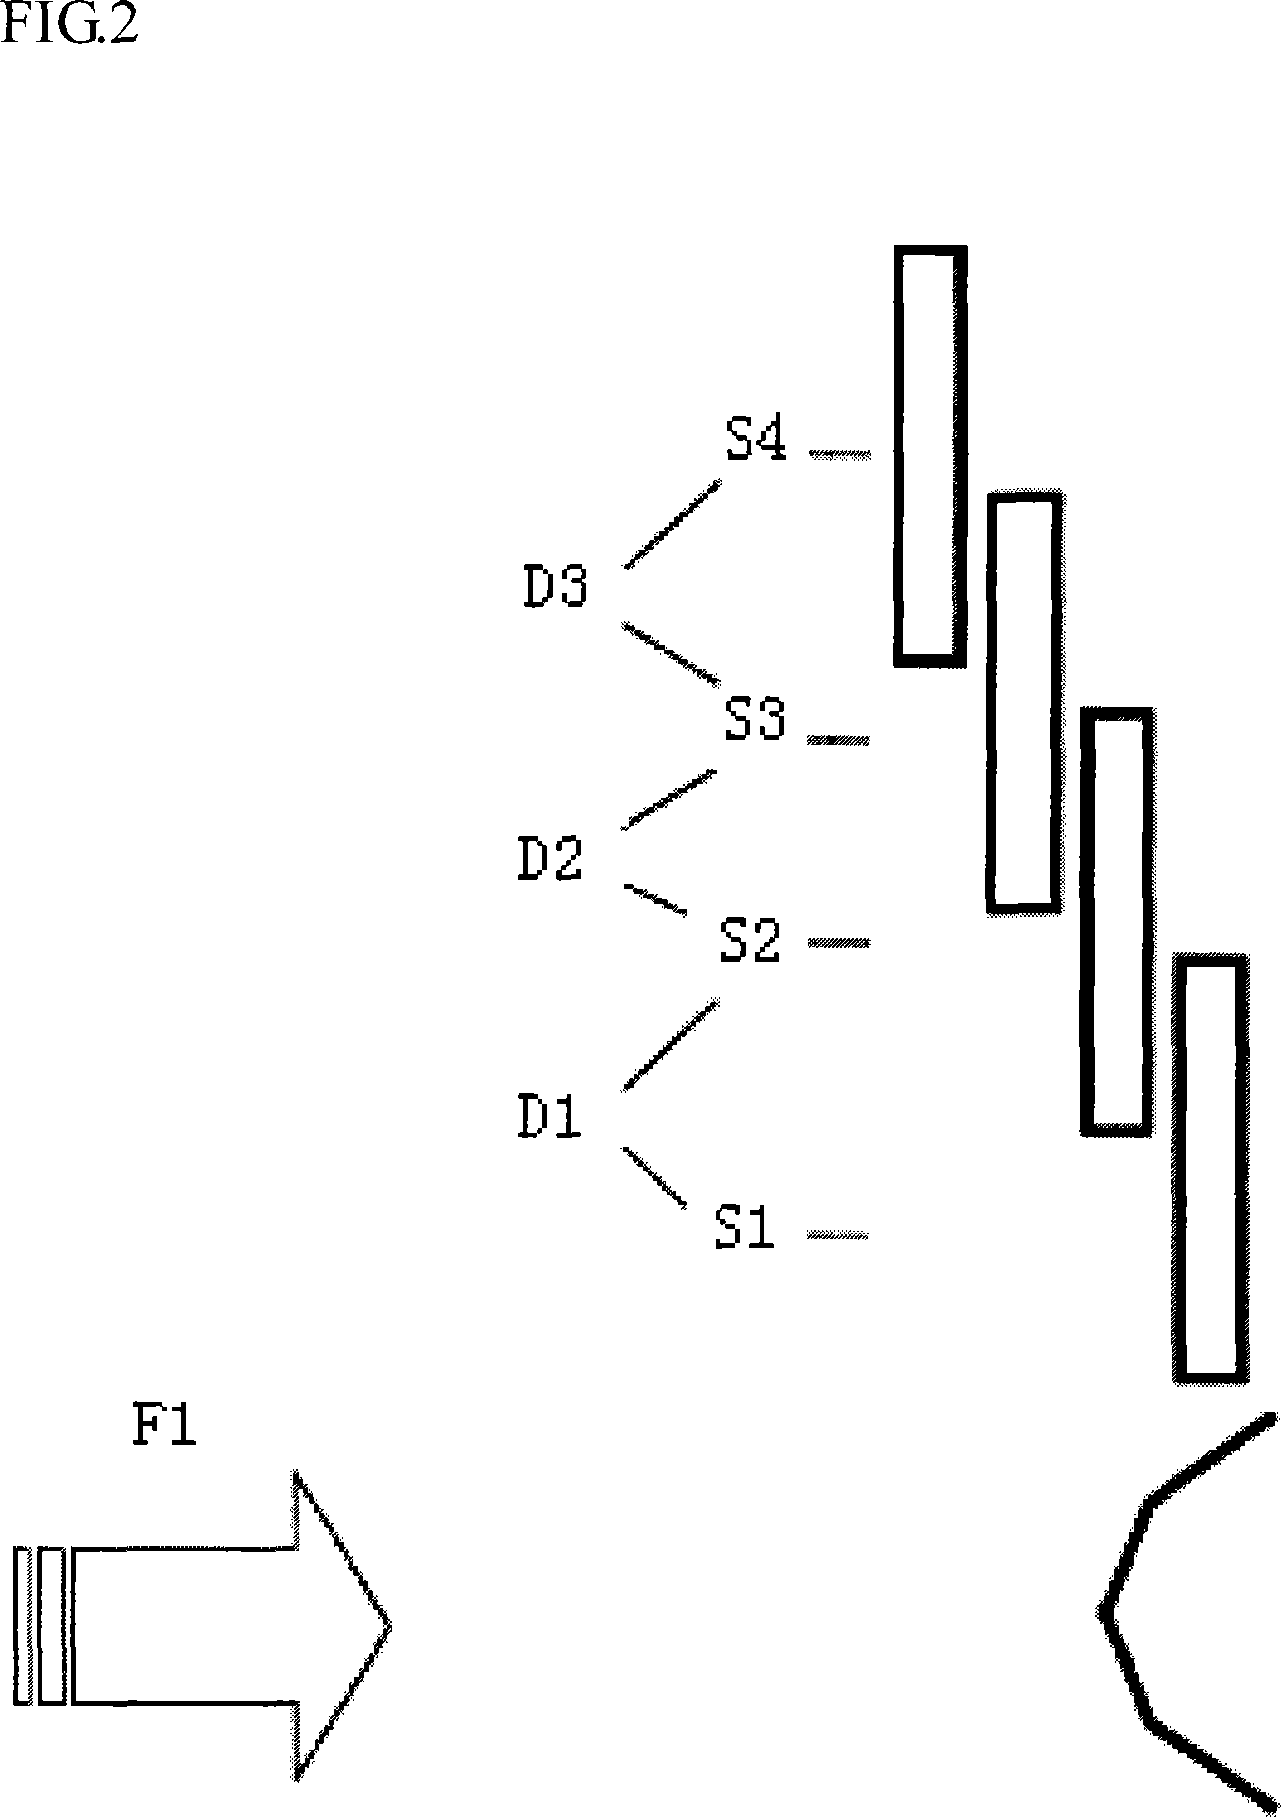 System for controlling wind turbine power, consisting in varying the coefficient and size of the swept areas